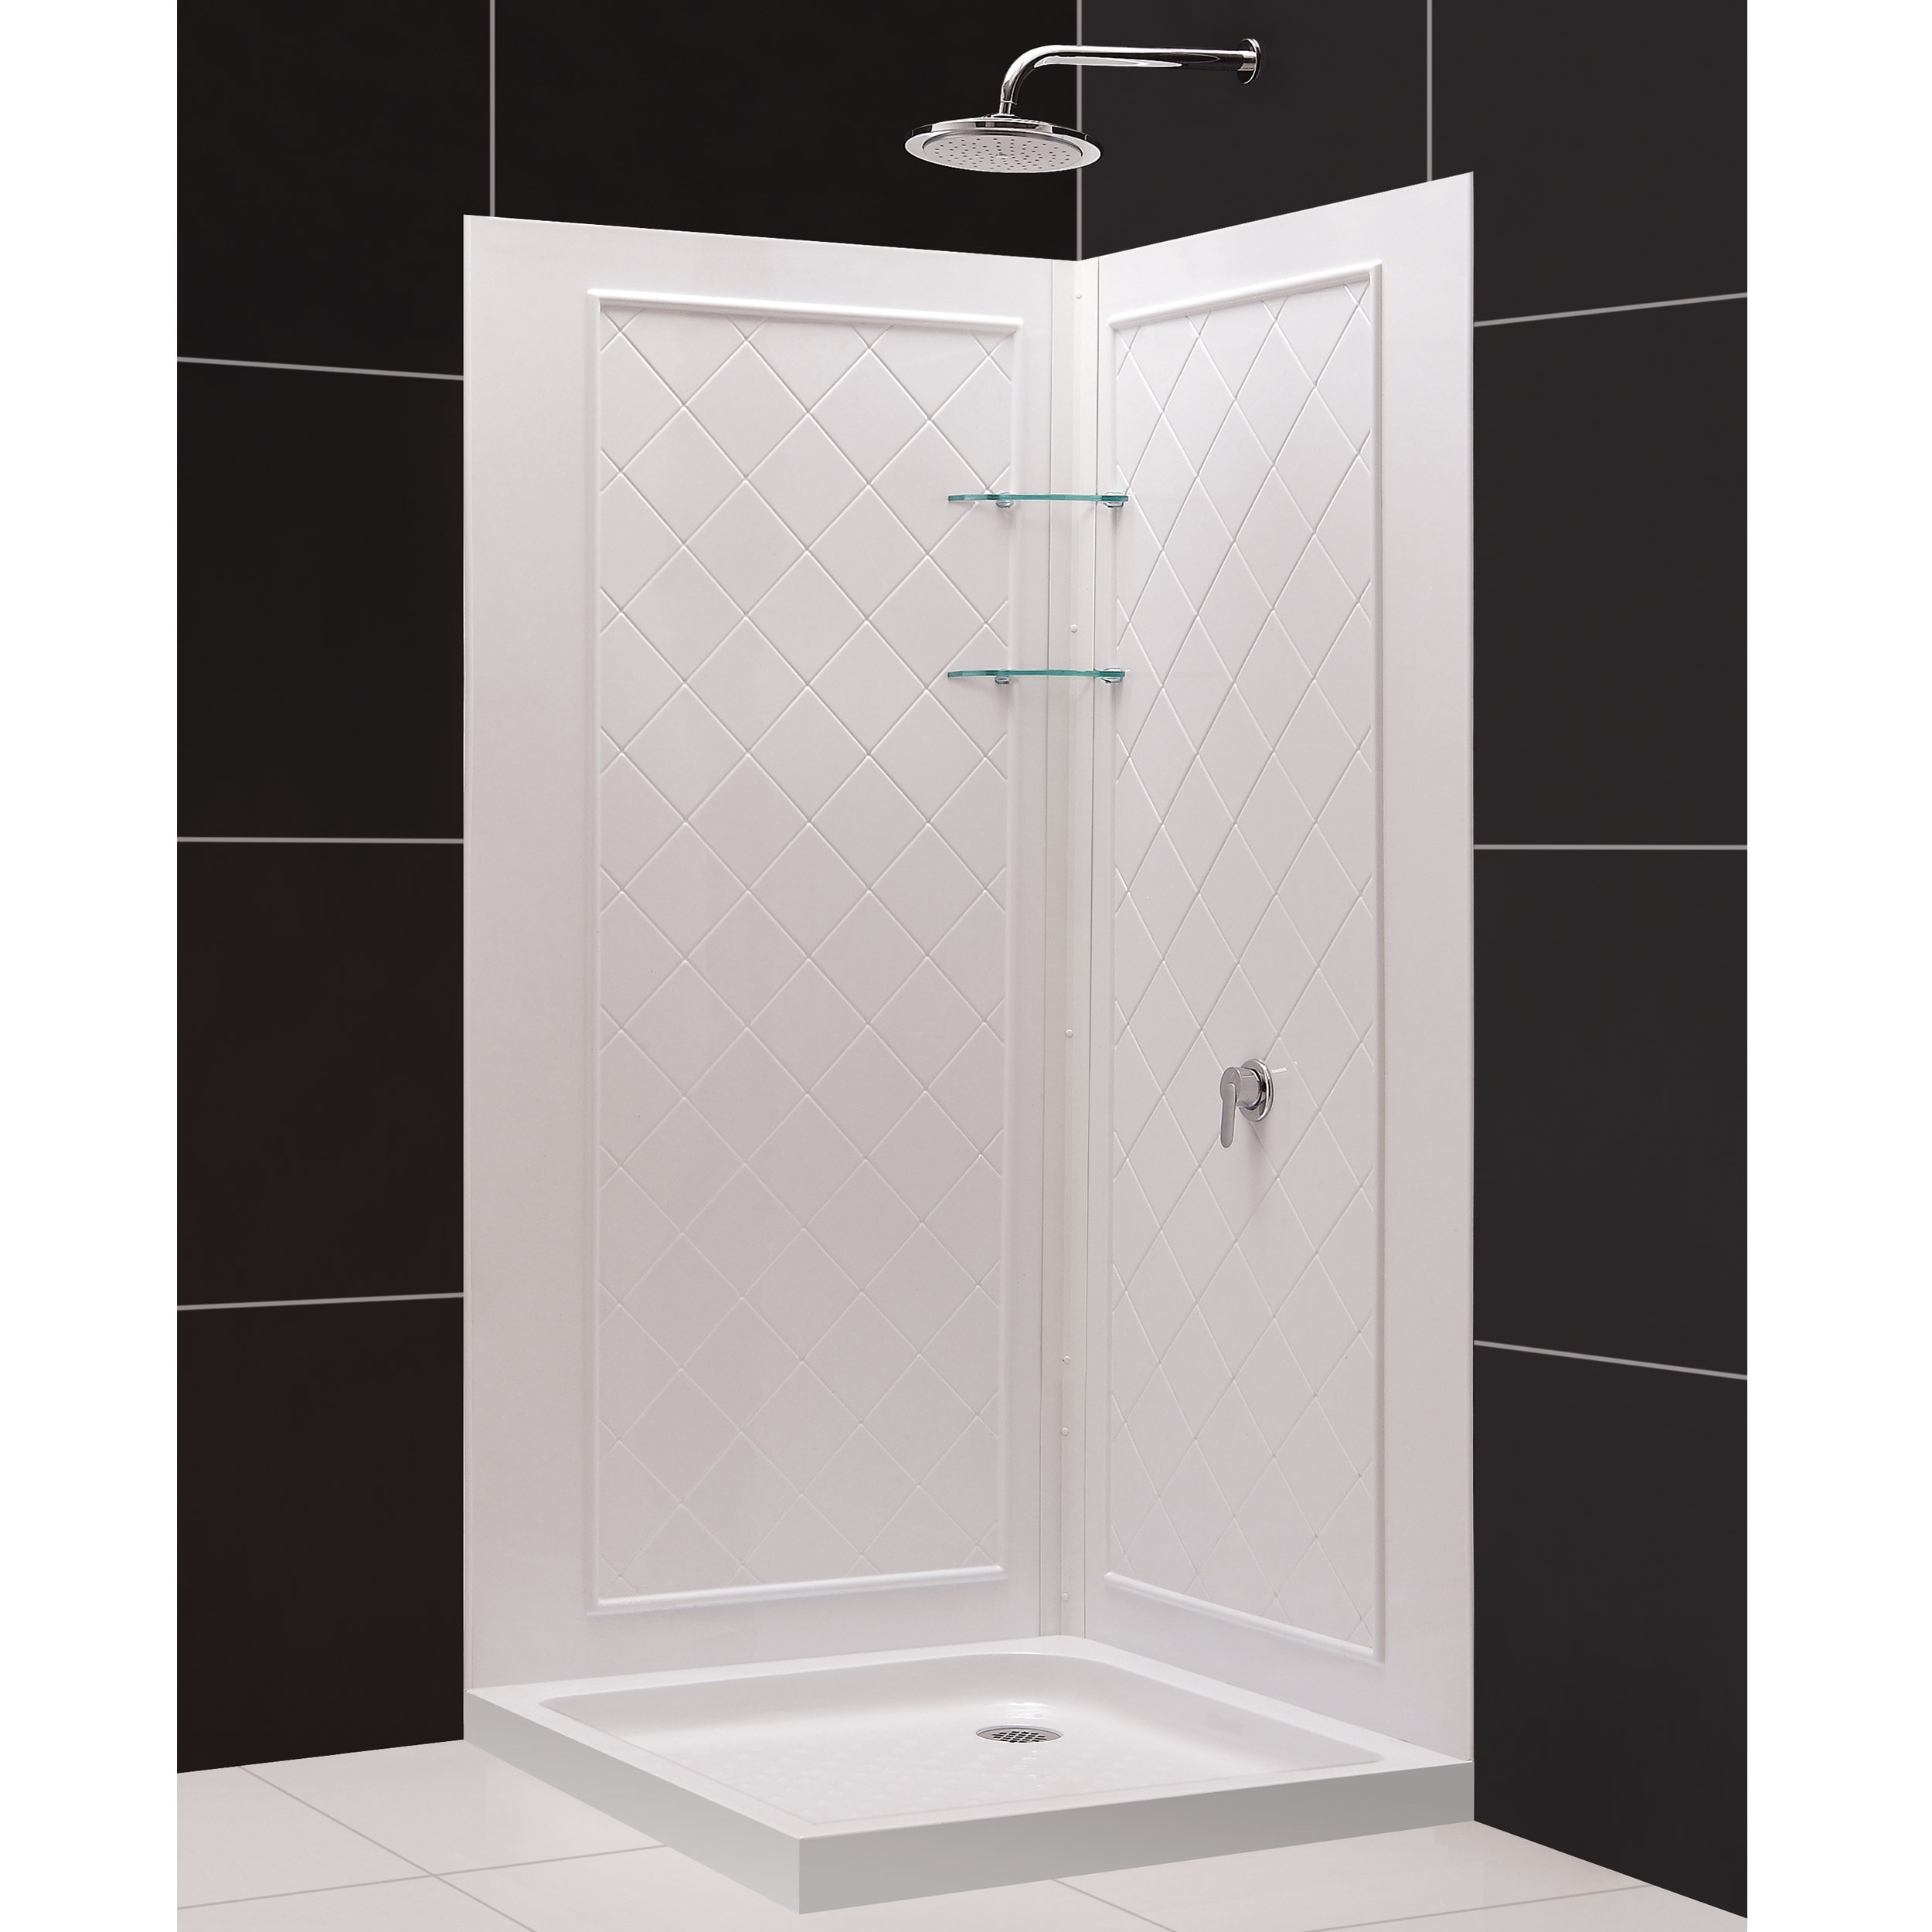 Dreamline Qwall 4 Shower Enclosure Backwalls Kit (WhiteDurable acrylic/ABS construction Designed to be installed over existing finished surface (not directly against stud)Includes 2 (two) panels and 2 (two) glass corner shelvesAttractive tile patternUniqu